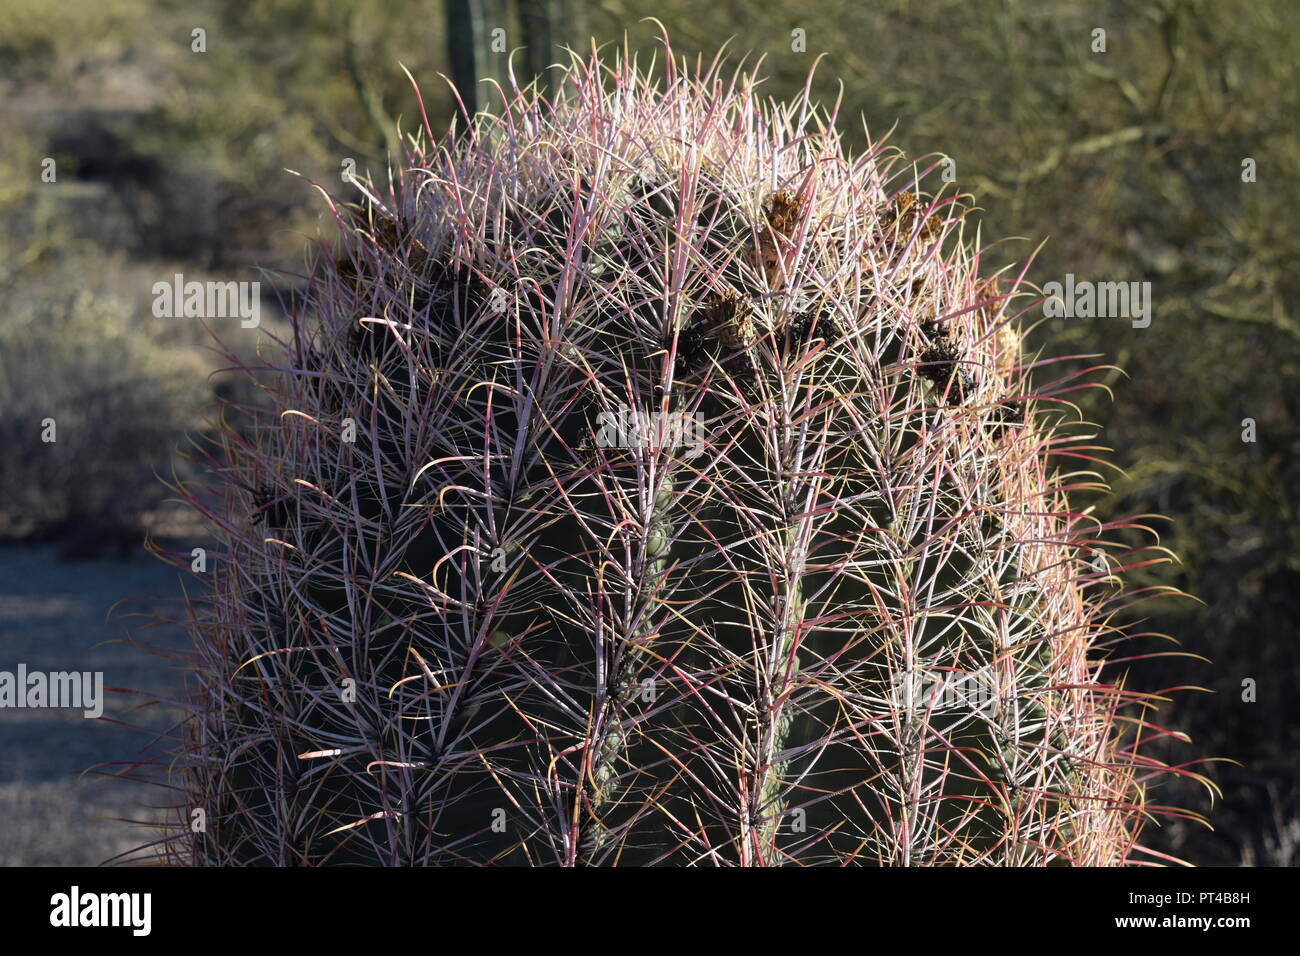 Closeup of a barrel cactus putting forth delicate new tendrils of Spring growth. Stock Photo